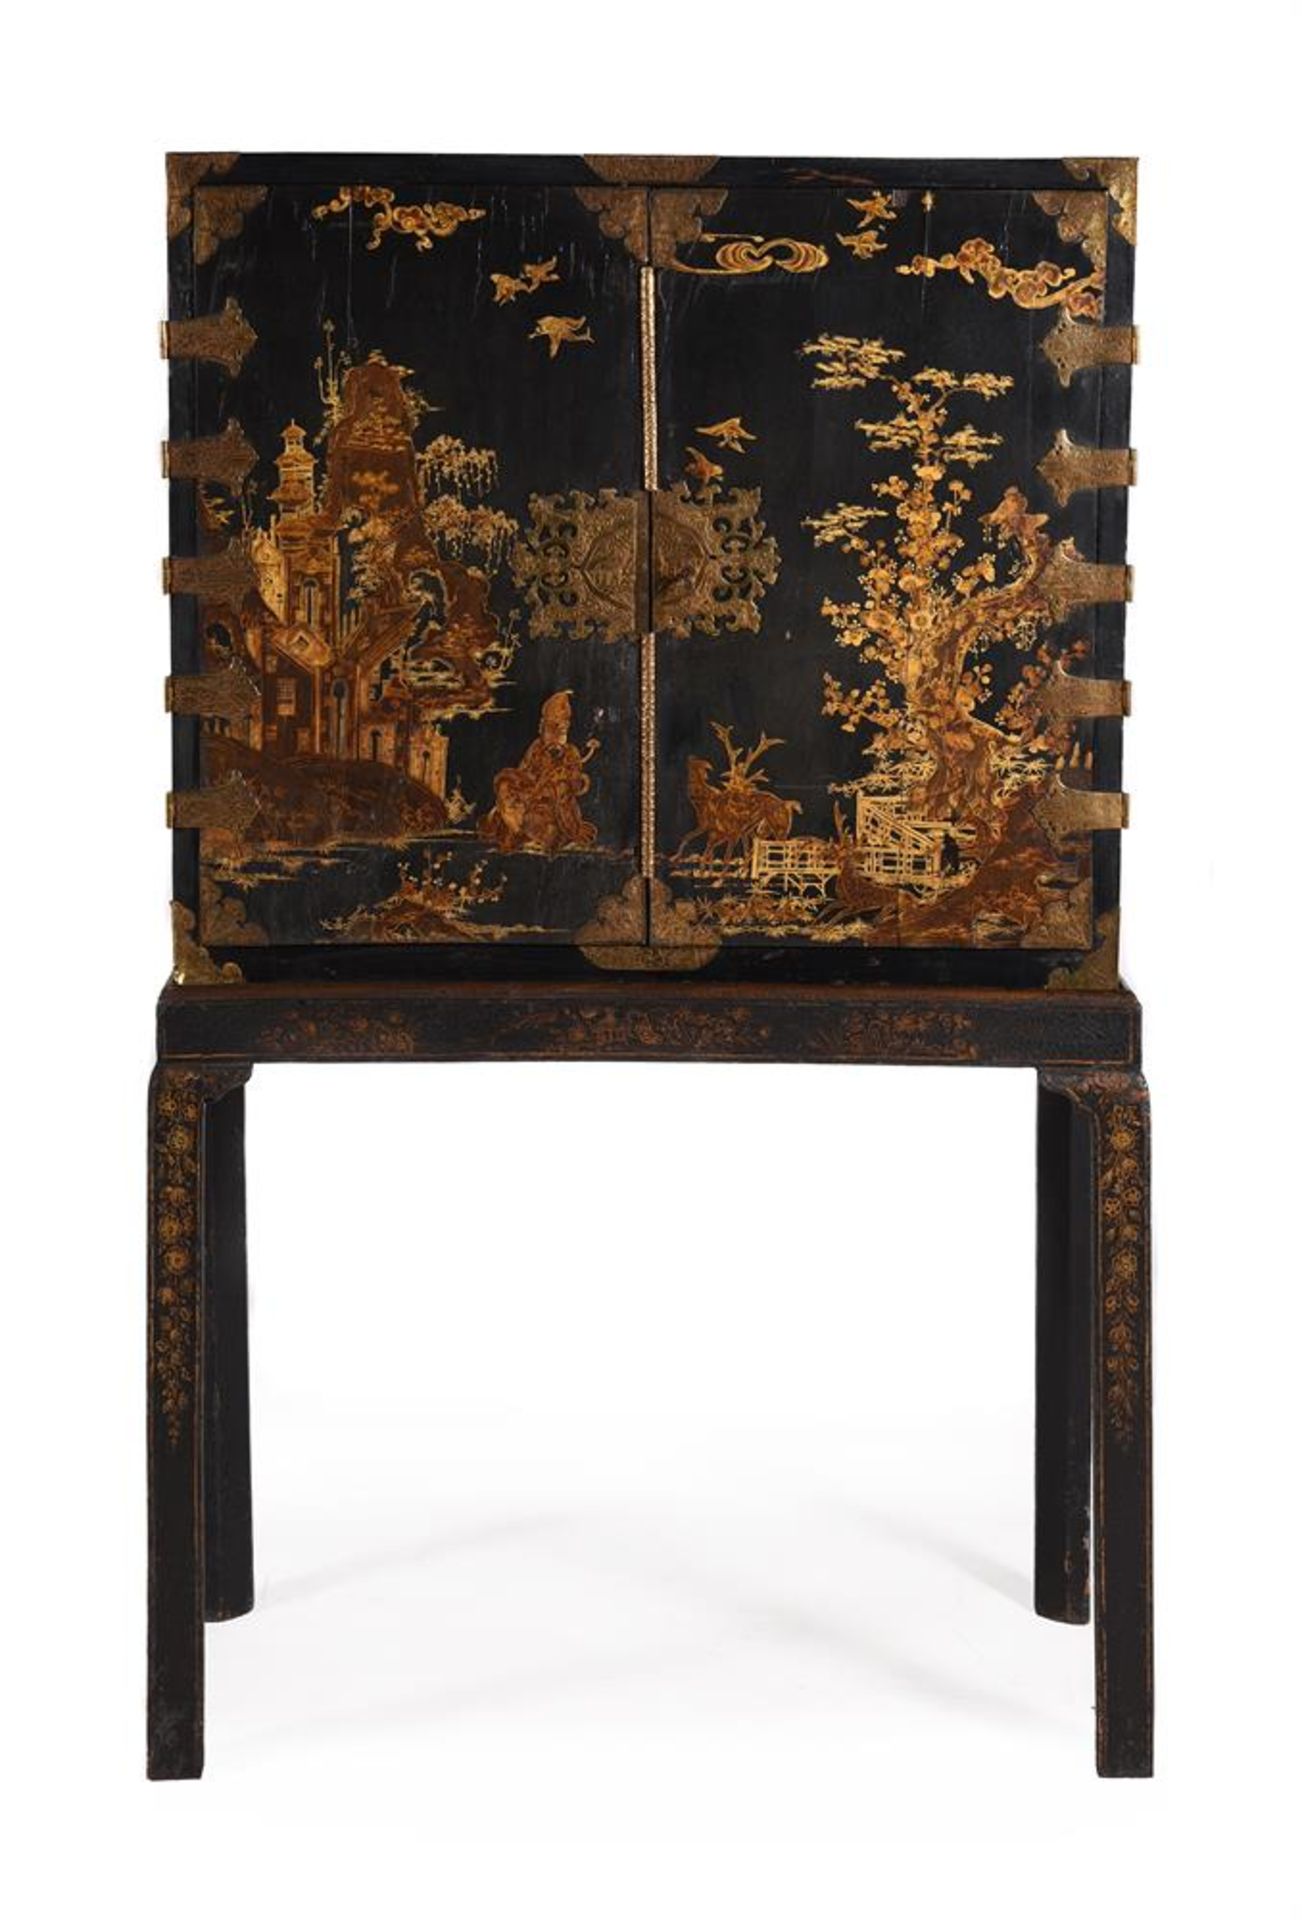 A WILLIAM & MARY BLACK LACQUER AND GILT JAPANNED CABINET ON STAND, THE CABINET LATE 17TH CENTURY